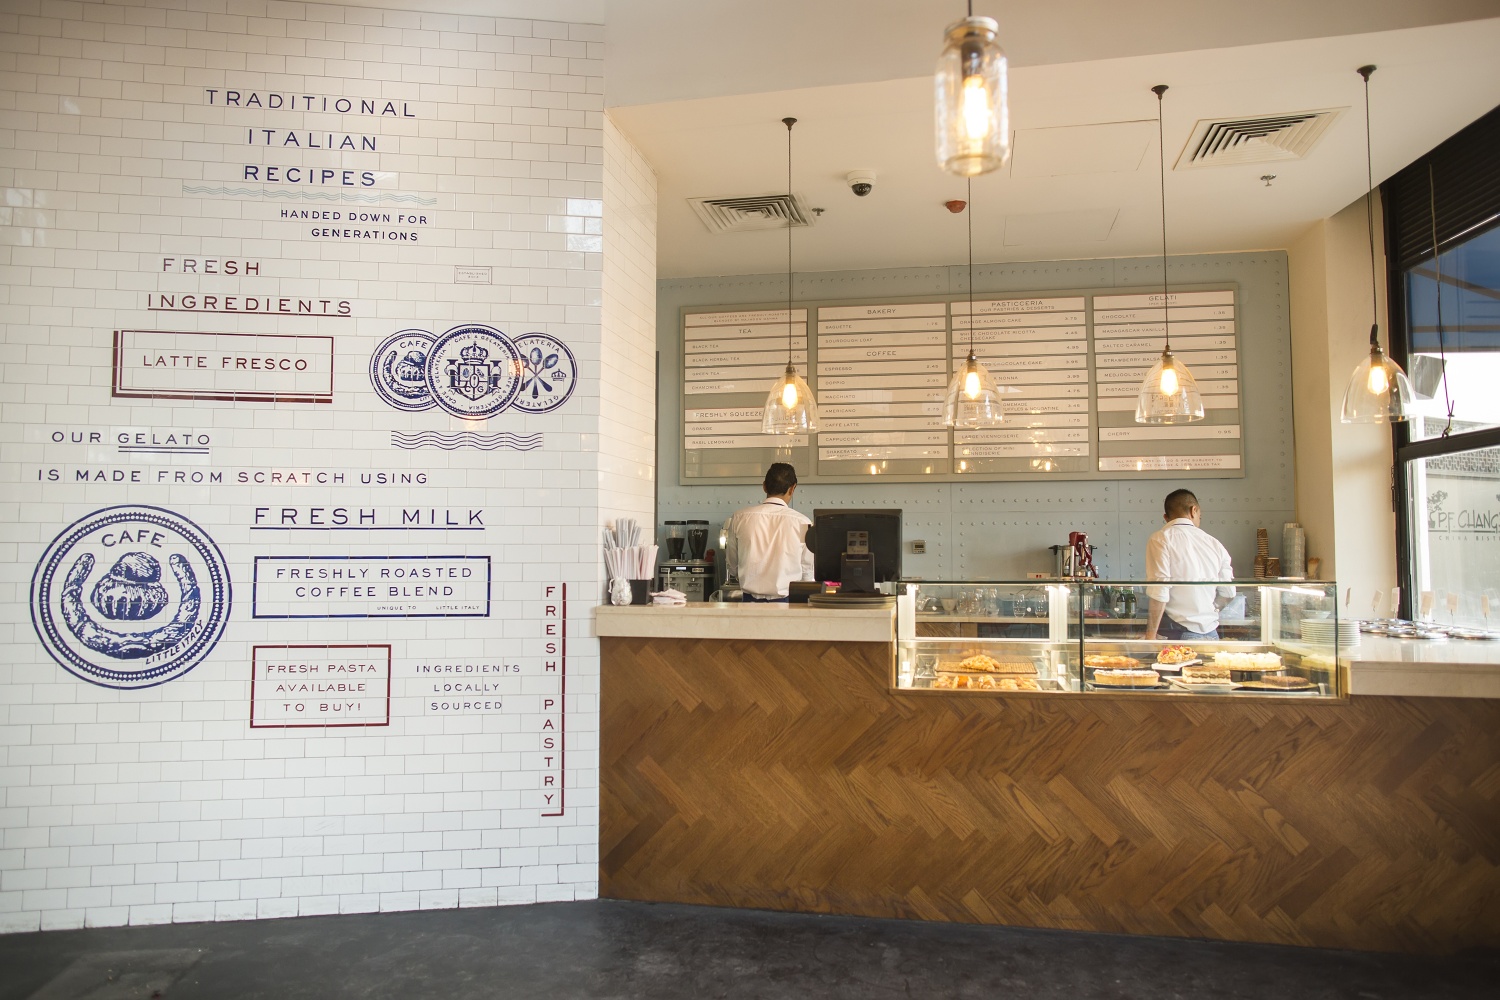 Branding and interior graphics by British studio Here Design for Amman-based restaurant Little Italy